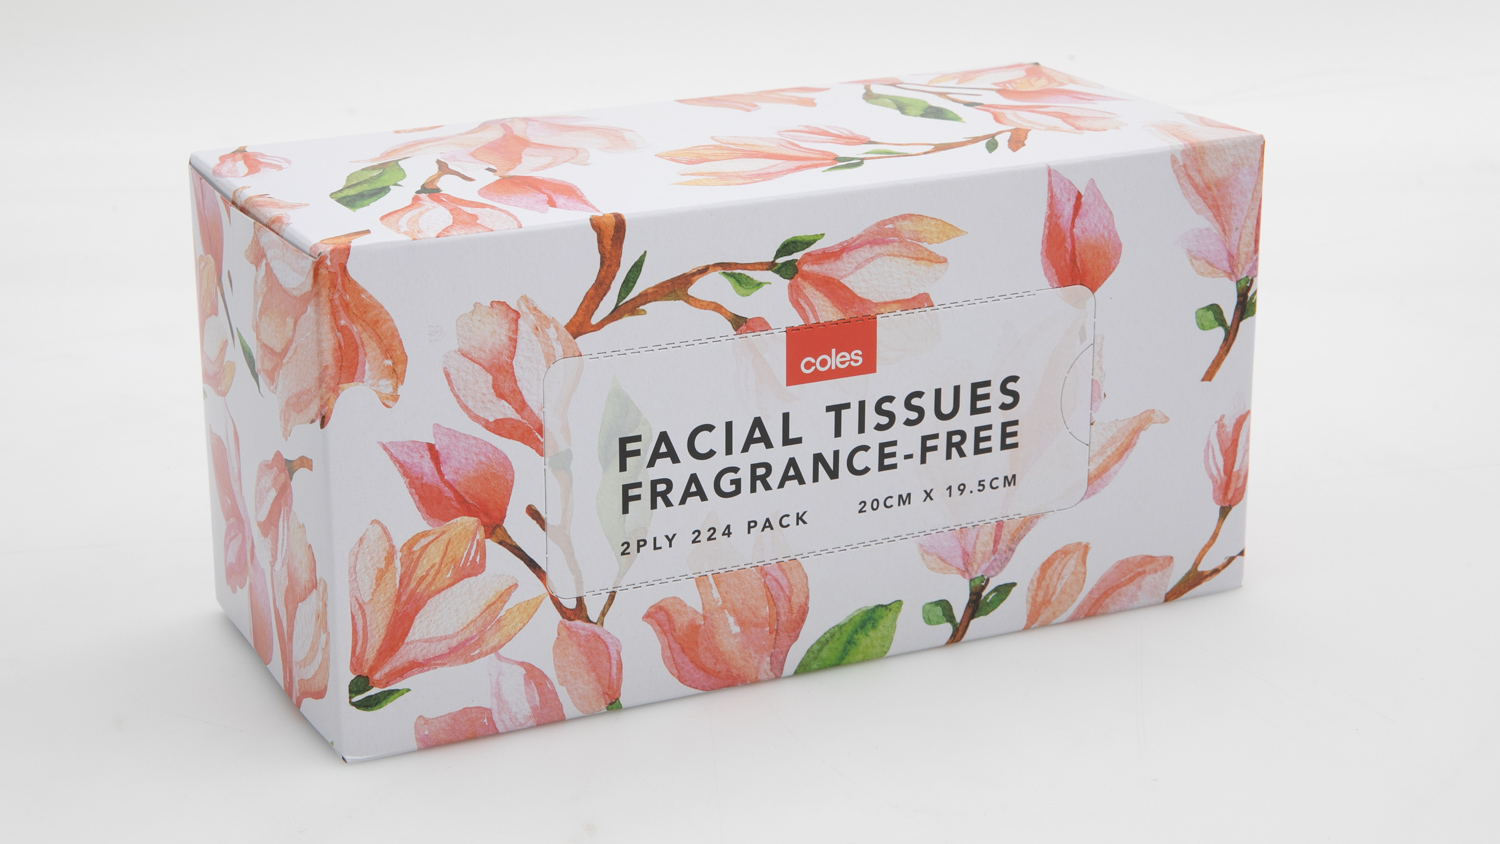 Coles Facial Tissues Fragrance-Free 224 pack carousel image